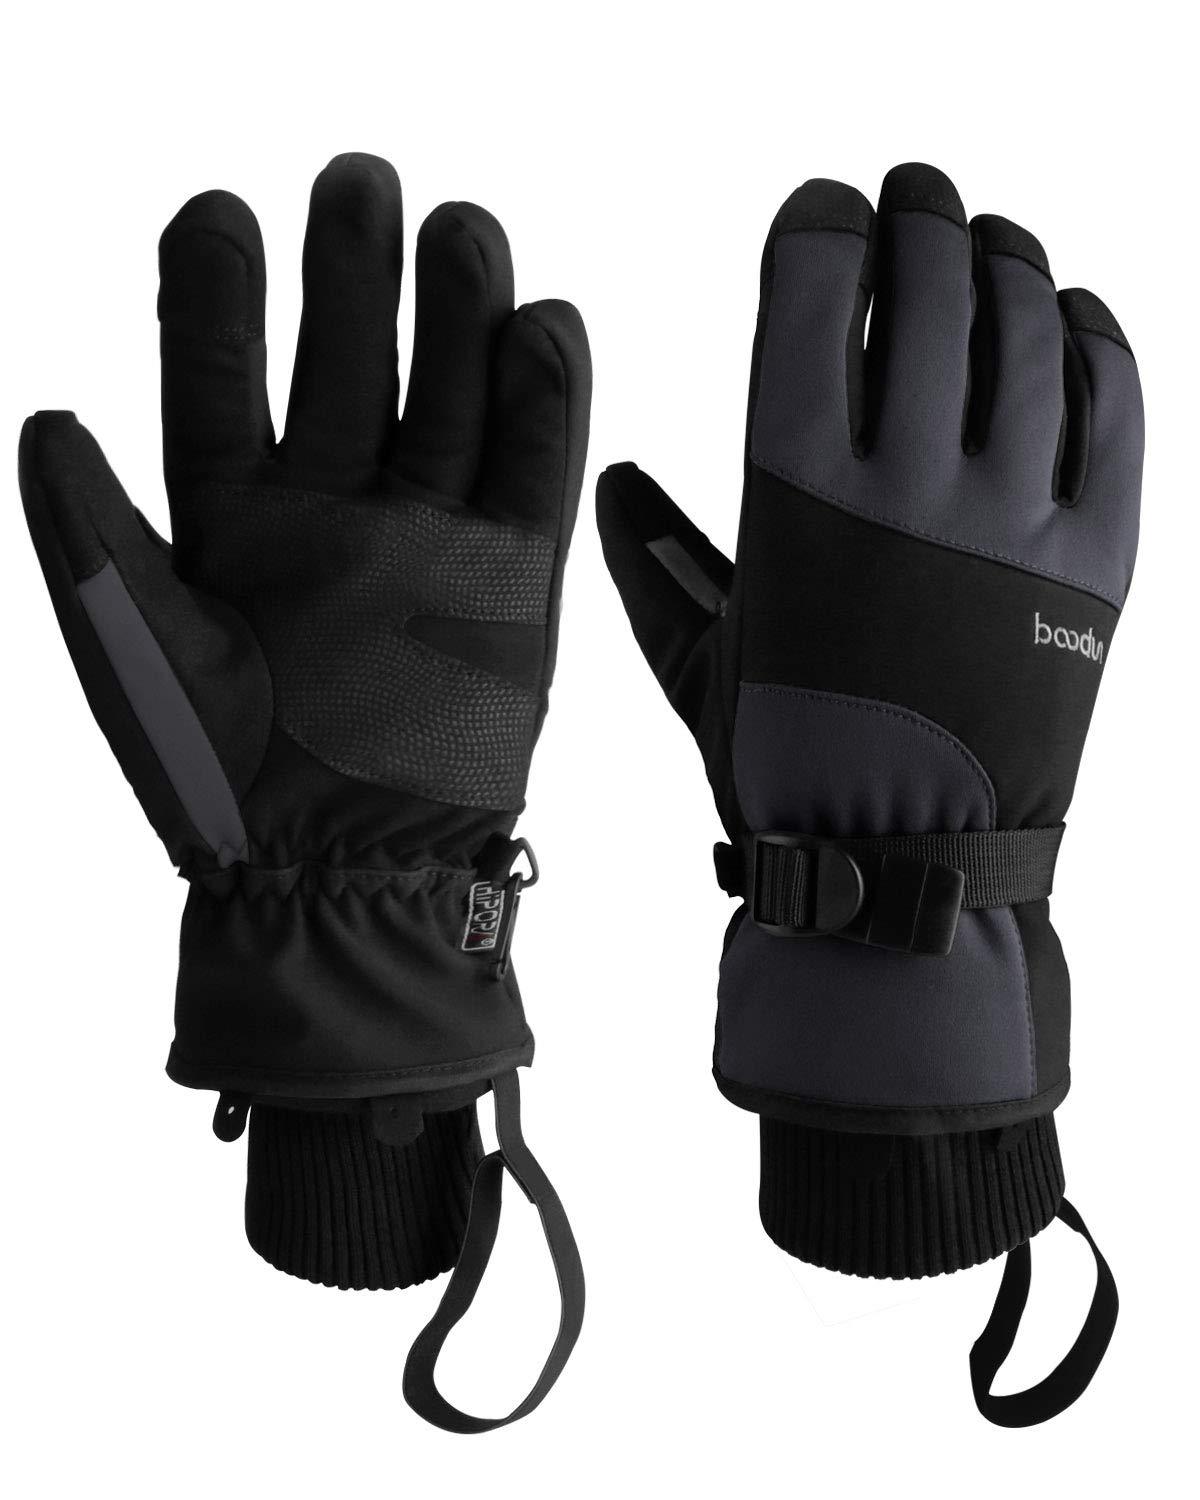 Cycling Snowboarding 3-Finger Mittens Men Women Winter Warm Gloves with Touchscreen for Cold Winter Skiing Waterproof Cold Weather Gloves Venoro Ski Gloves